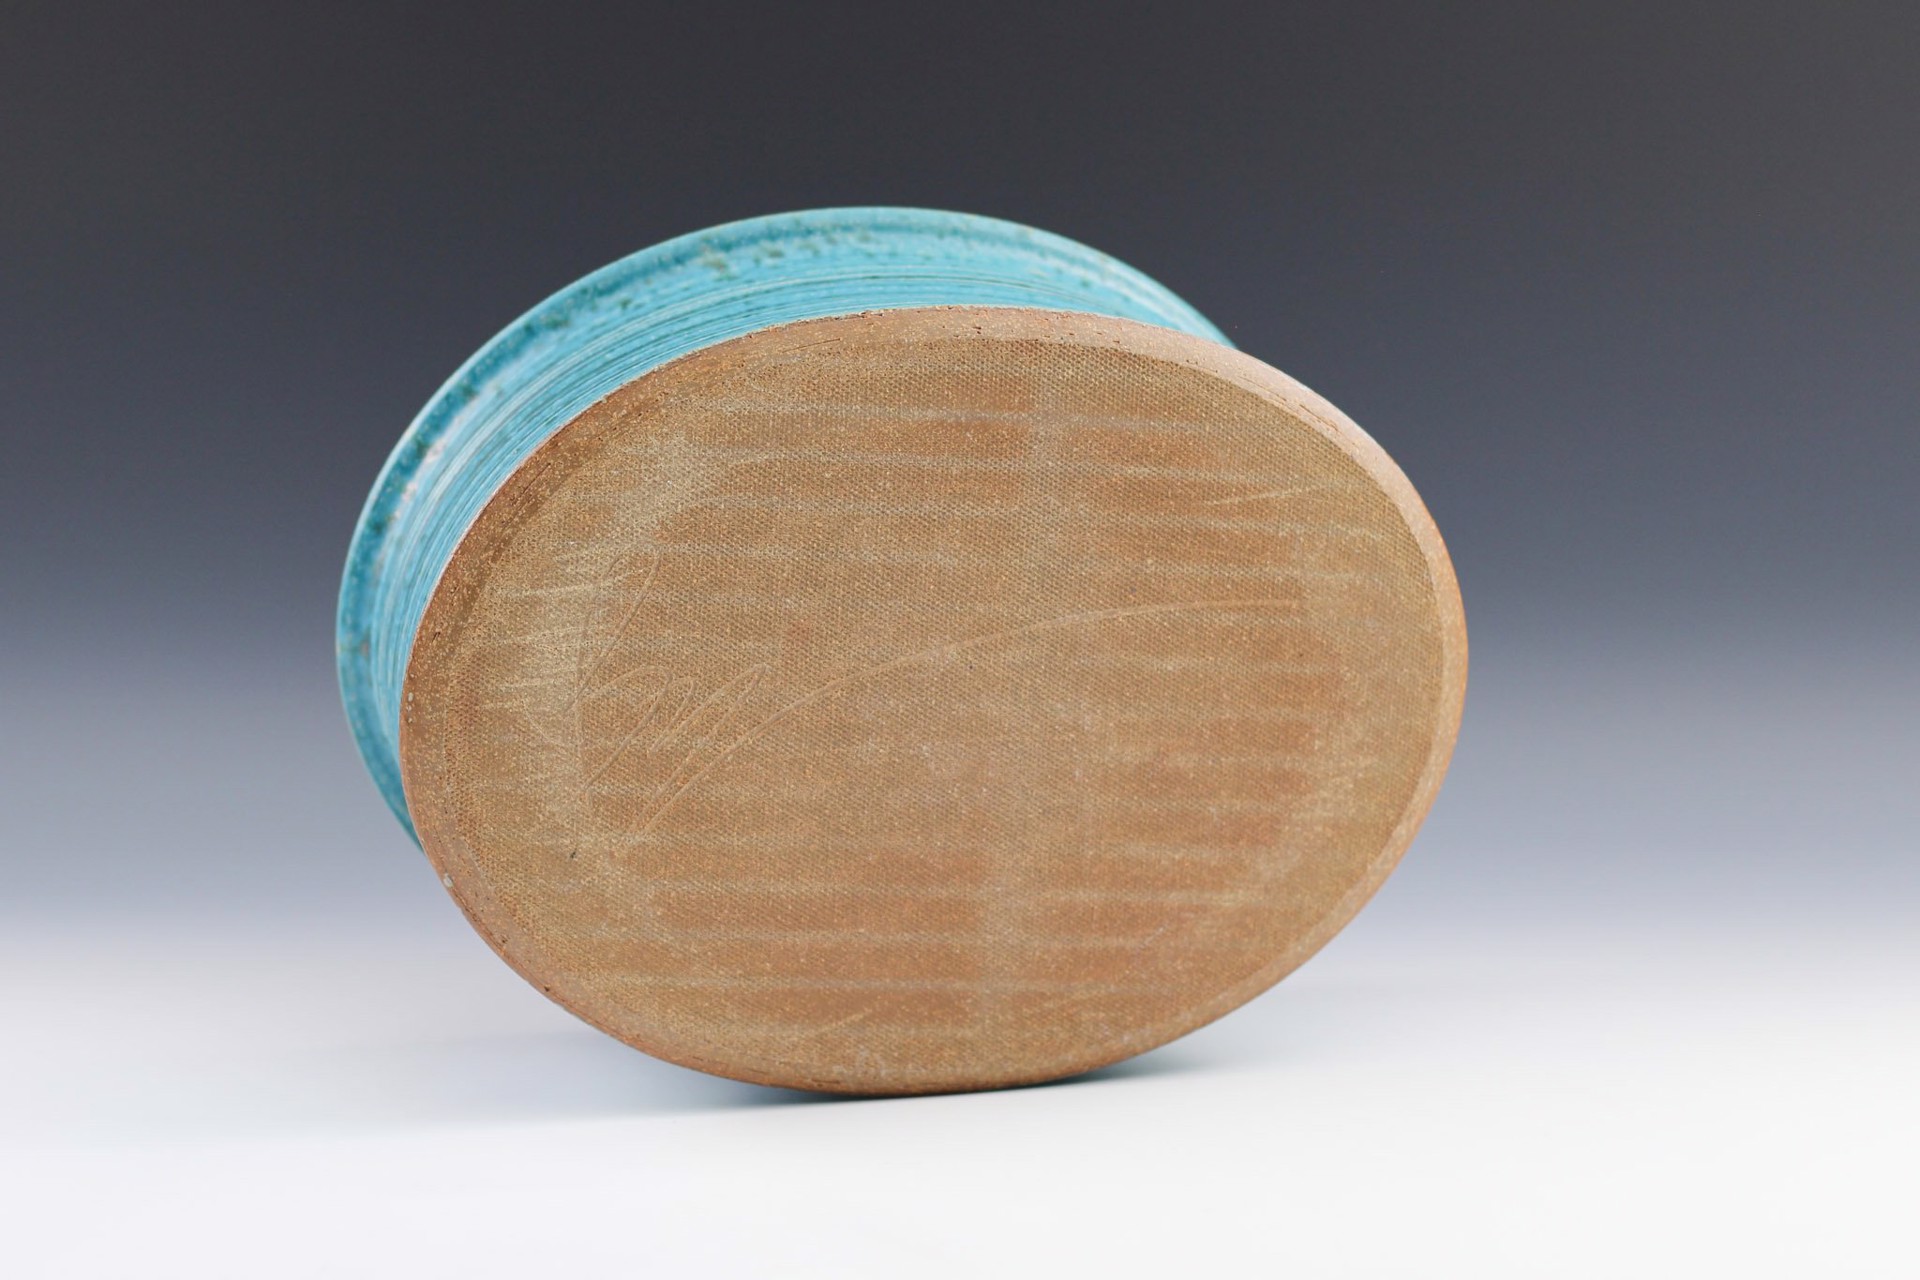 Turquoise/Mamo Oval Dish by Winthrop Byers